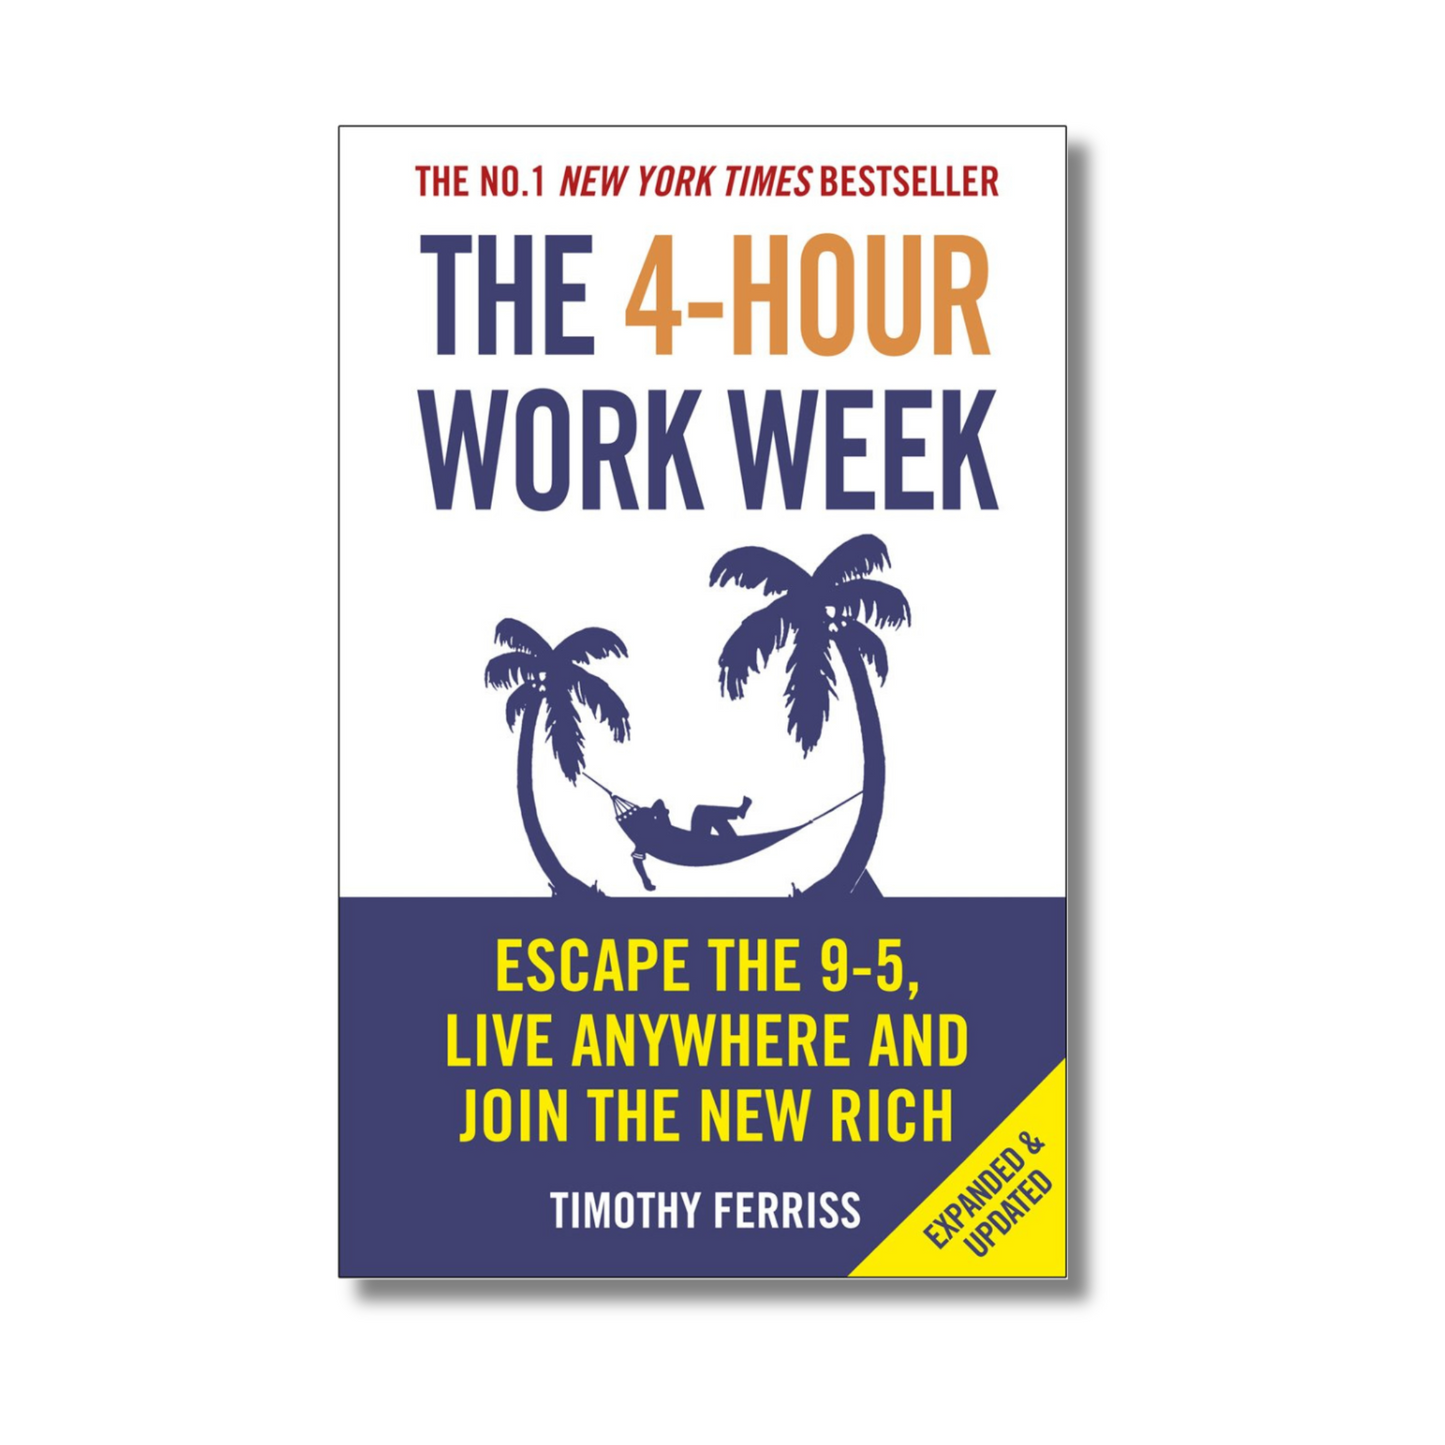 The 4-Hour Work Week by Timothy Ferriss Escape the 9-5, Live Anywhere and Join the New Rich (Paperback)